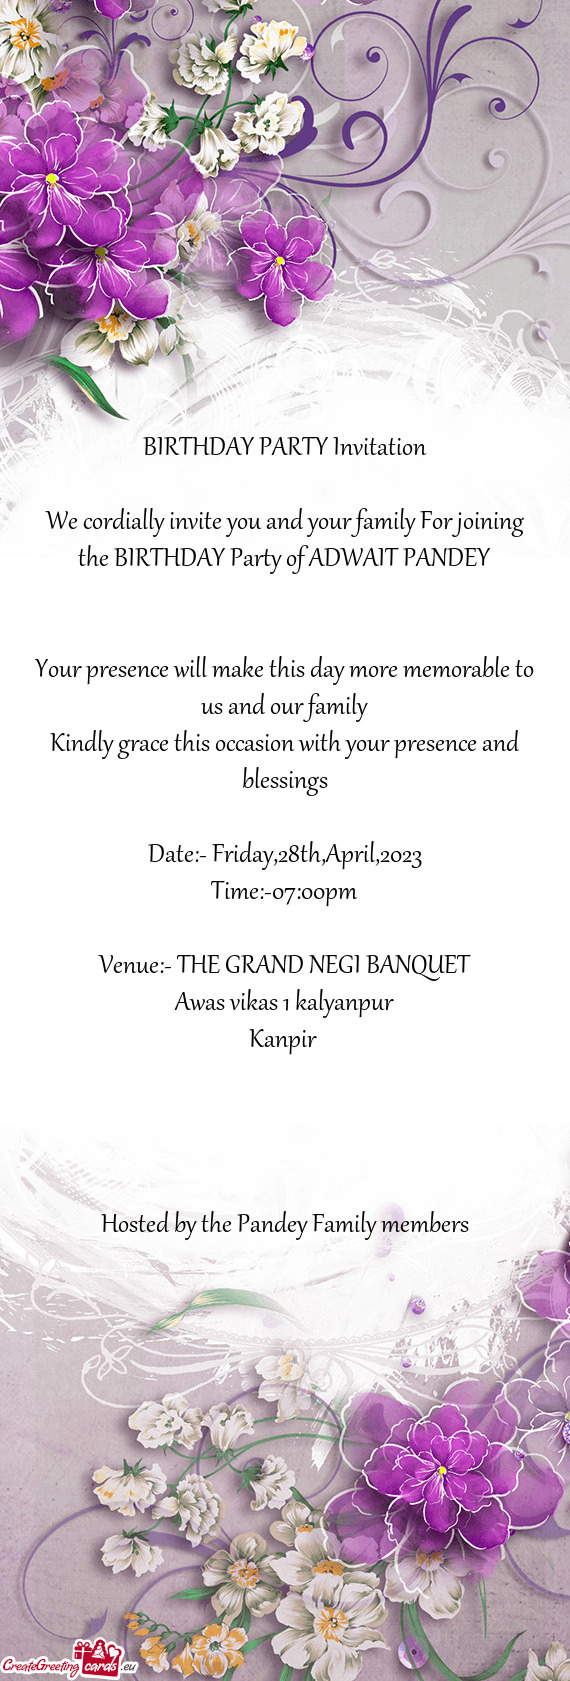 We cordially invite you and your family For joining the BIRTHDAY Party of ADWAIT PANDEY